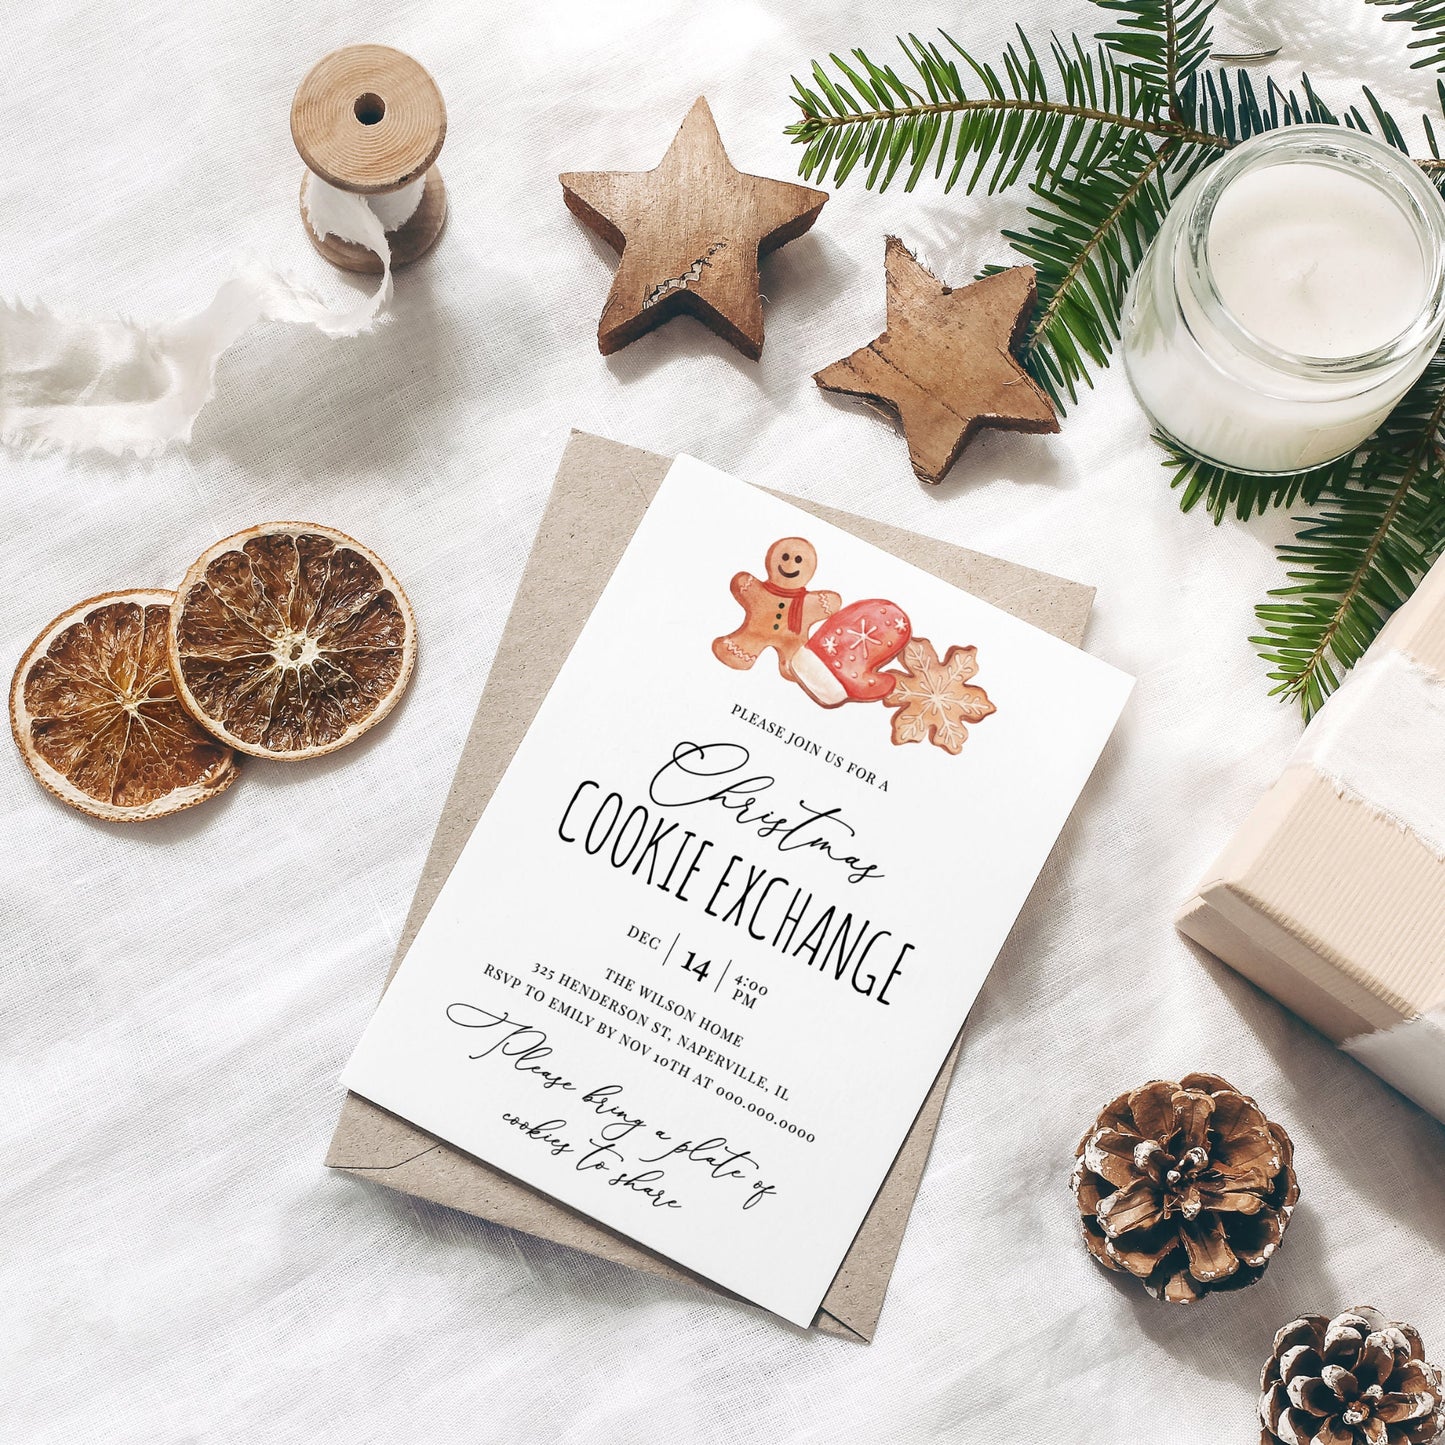 Editable Cookie Exchange Invitation Christmas Cookies Holiday Cookie Party Invite Template